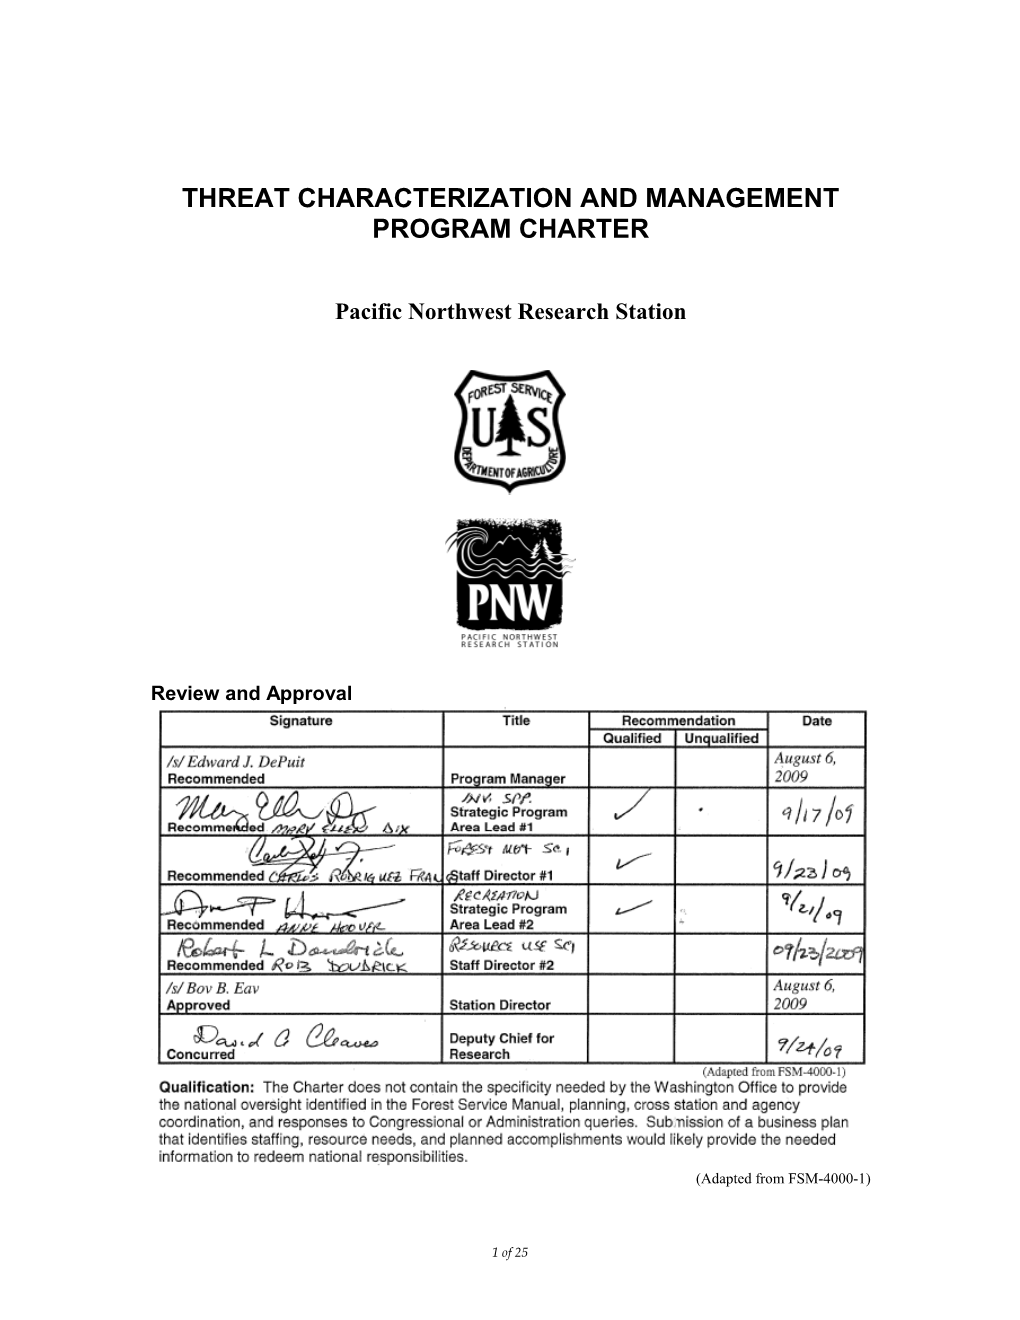 Threat Characterization and Management Program Charter